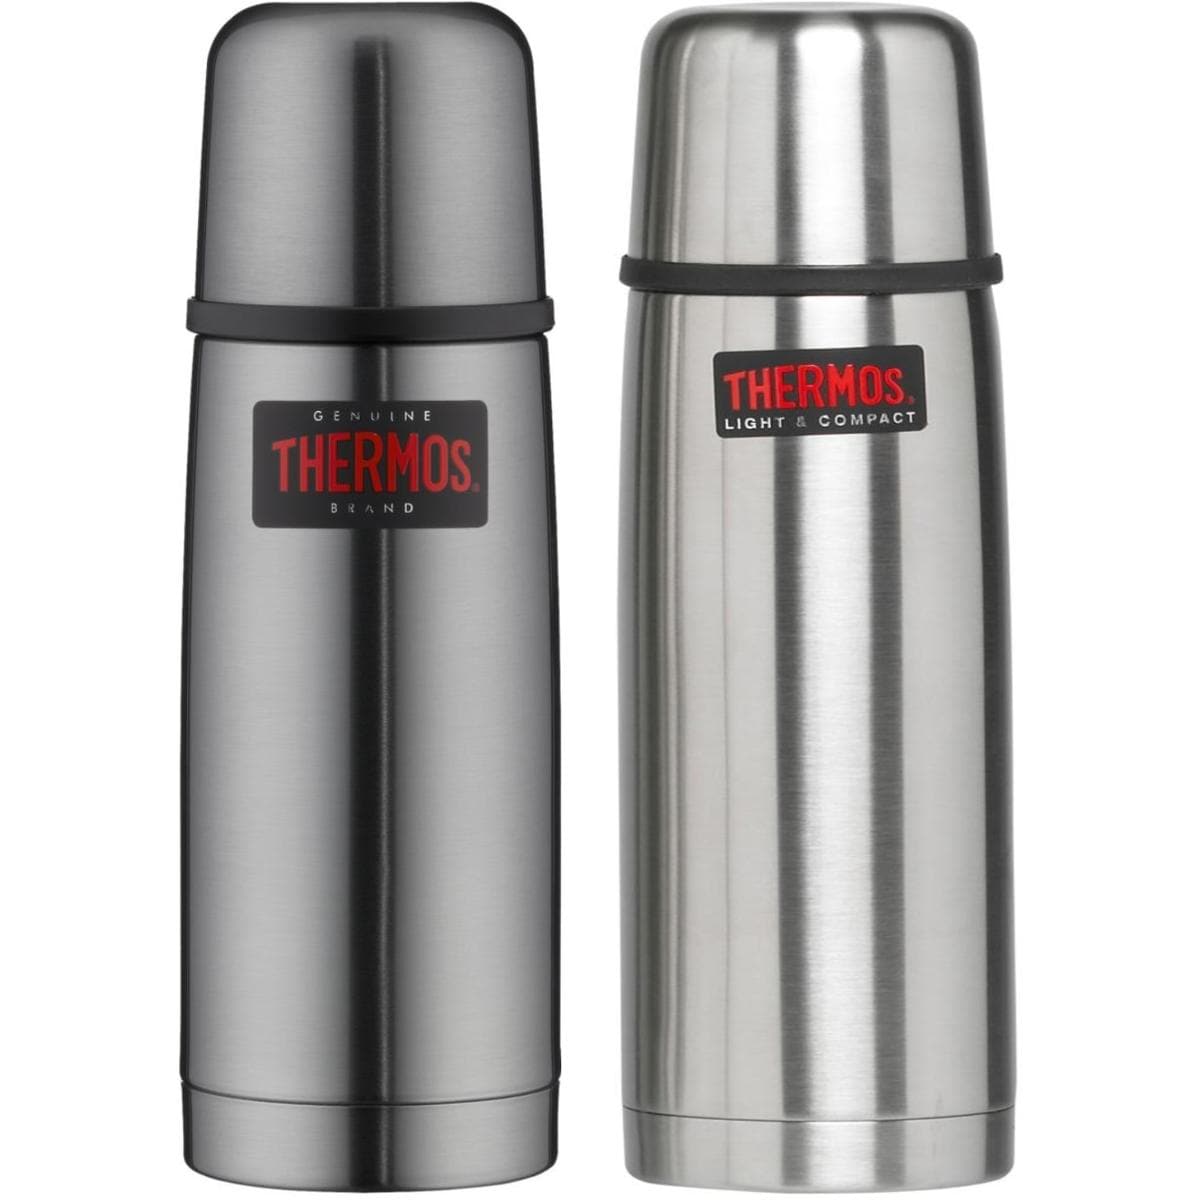 Thermos Light bei Camping Campingzubehör & Thermosflasche Compact Wagner